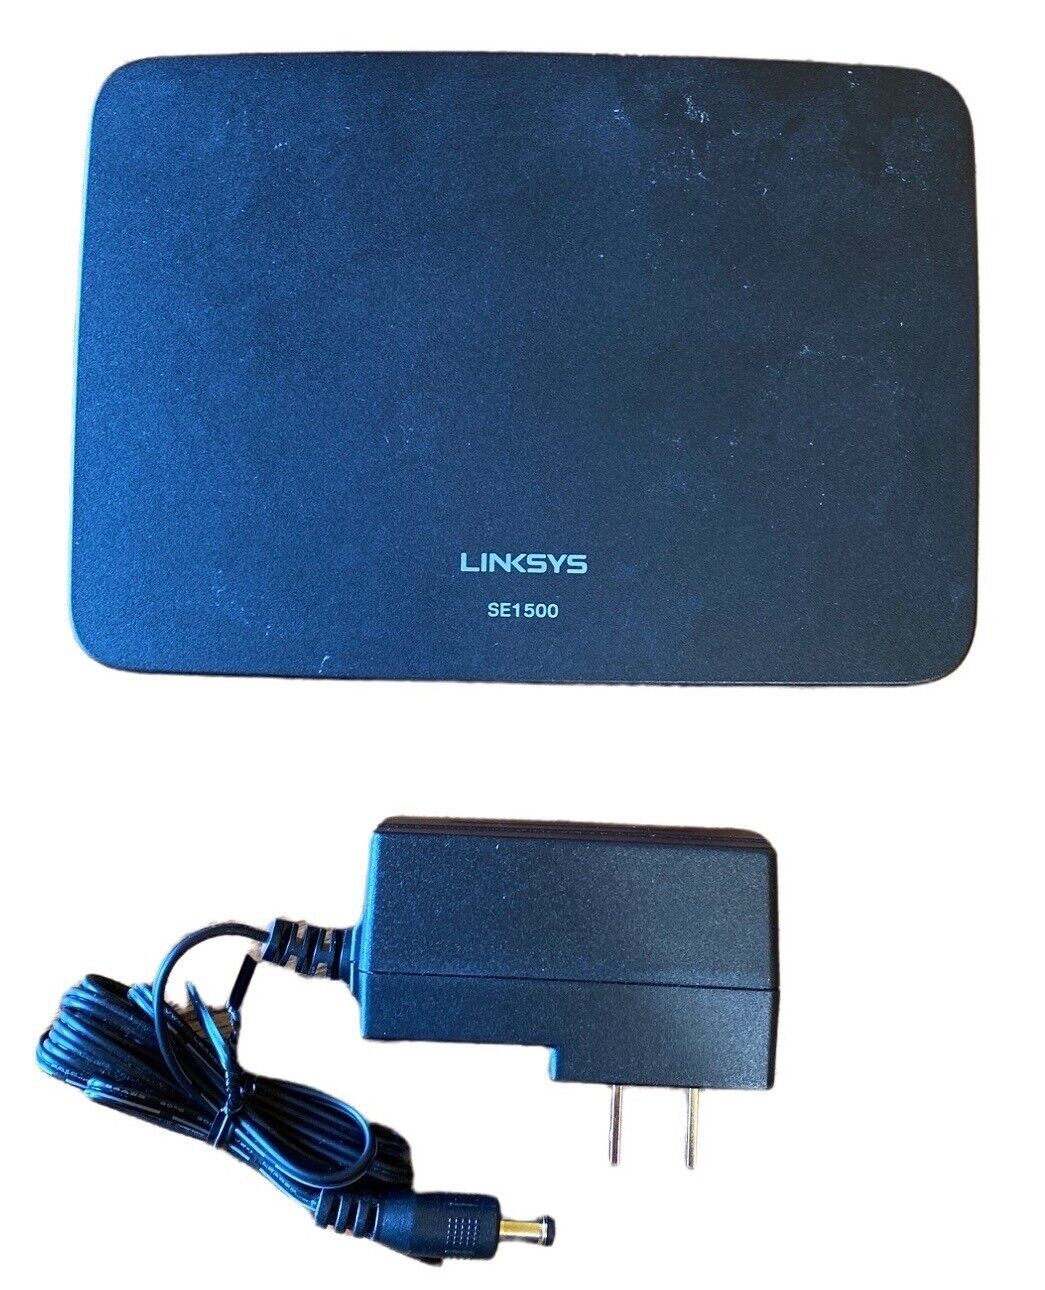 Pre-Owned Linksys Router SE1500 N10117